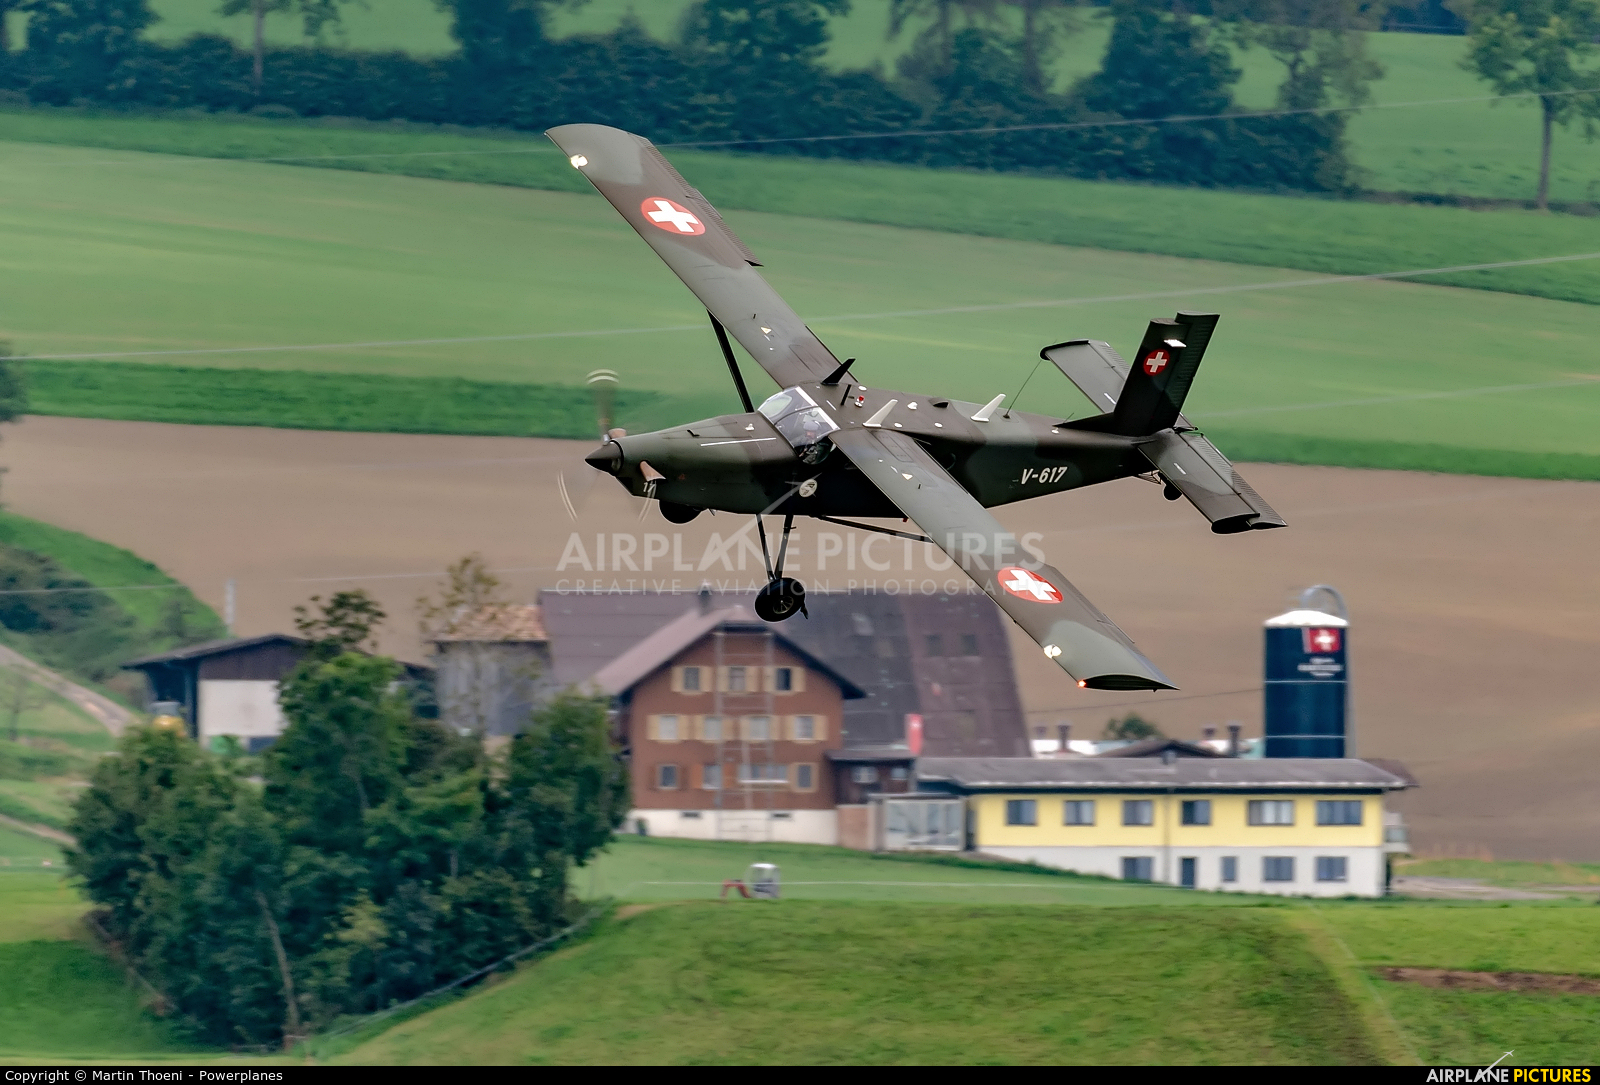 Switzerland - Air Force V-617 aircraft at Off Airport - Switzerland